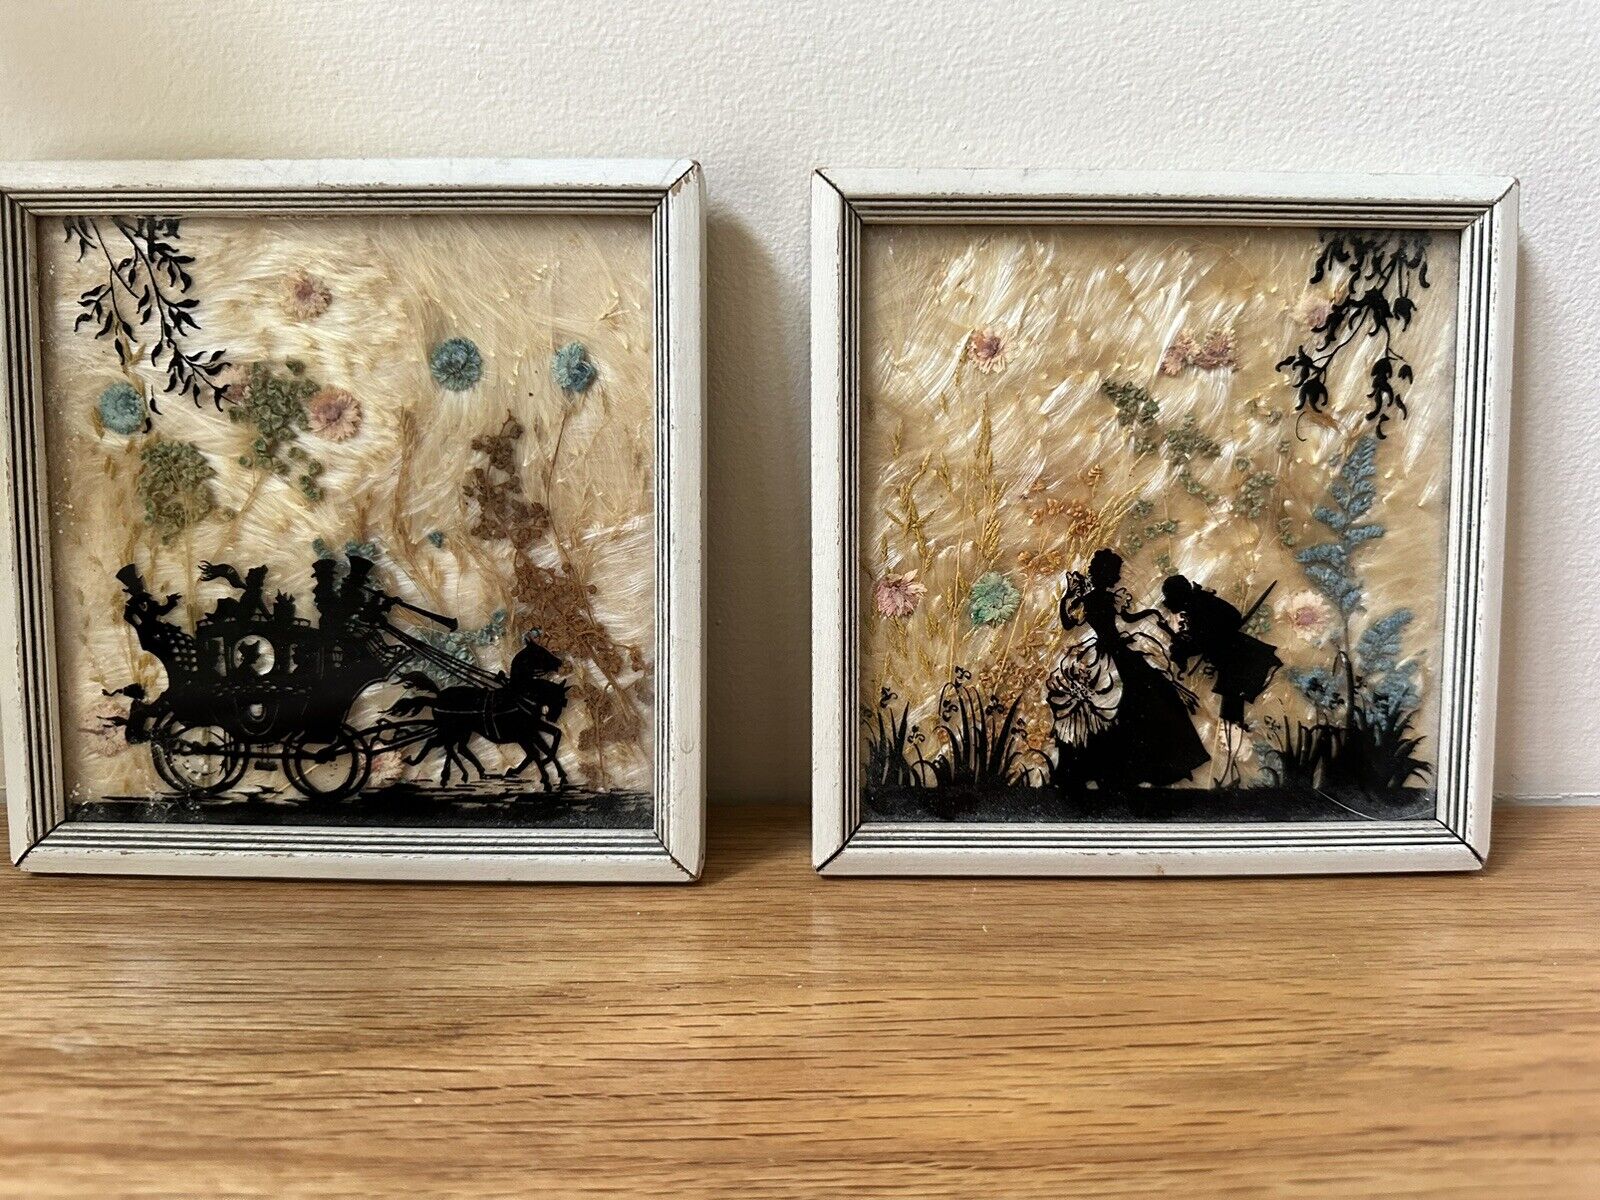 Exquisite Pair Of Silhouettes, Reverse Painted on Glass